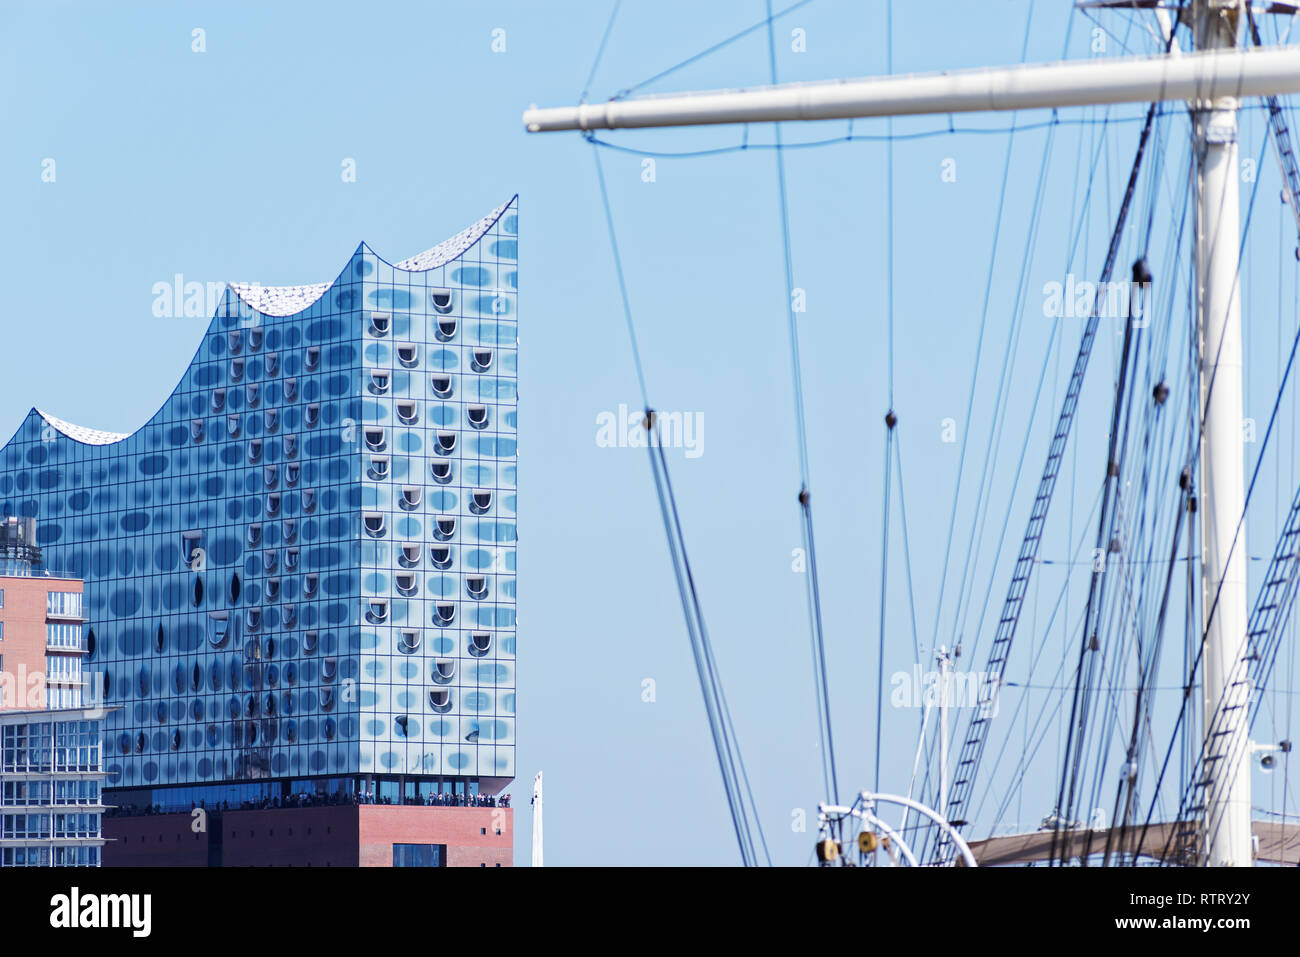 Hamburg, Germany - 27 June, 2018: Elbphilharmonie or so-called 'Elphi' - Elbe Philharmonic Hall in the harbor of Hamburg against clear blue sky and th Stock Photo